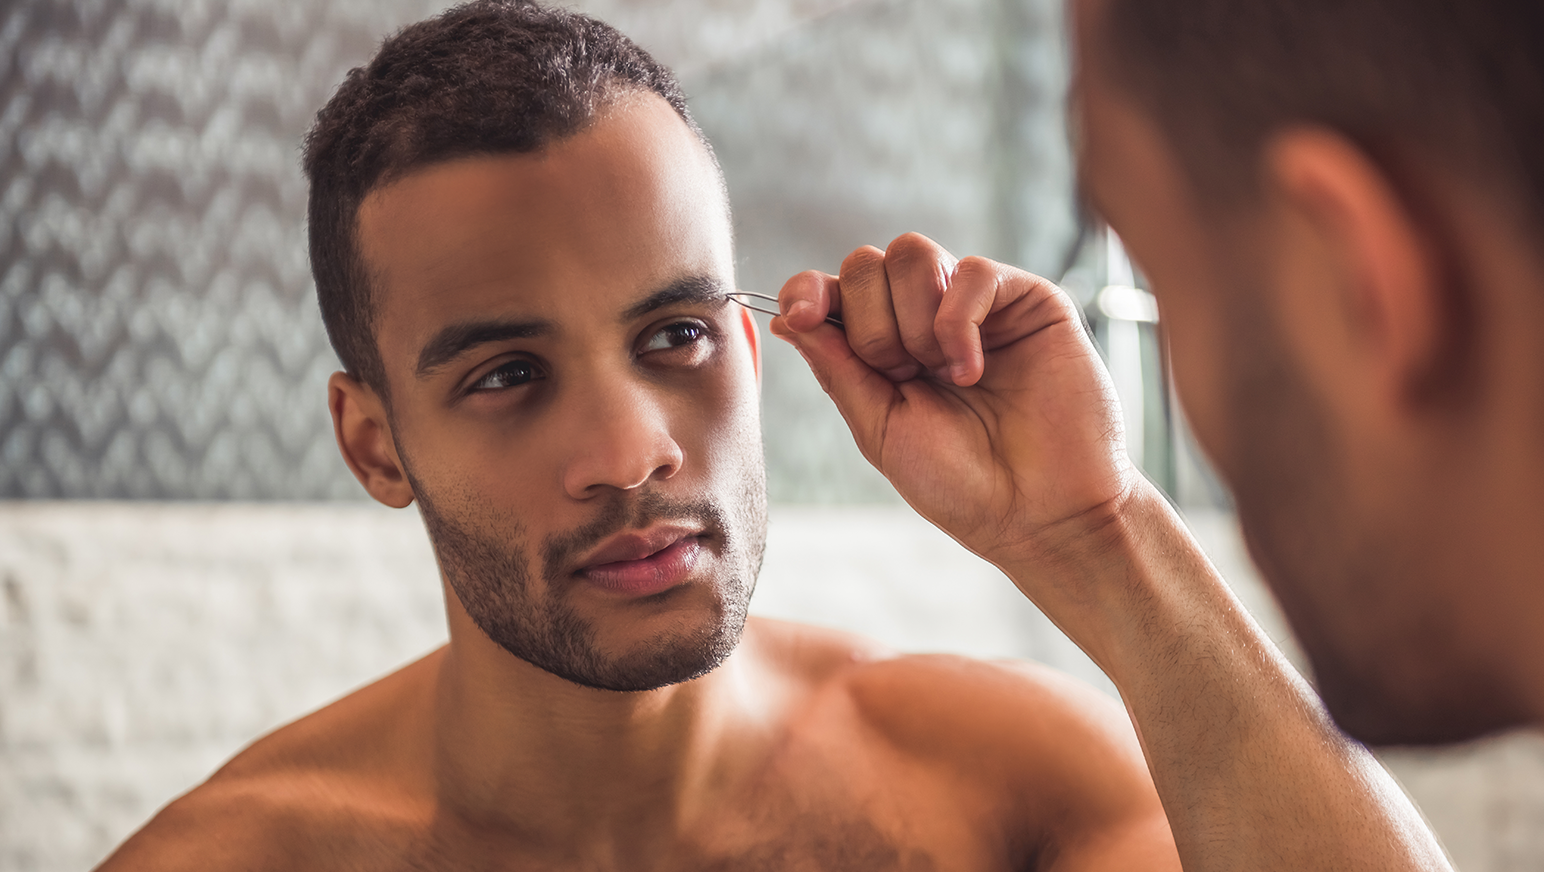 Does Shaving Make Hair Thicker or Grow Back Faster?